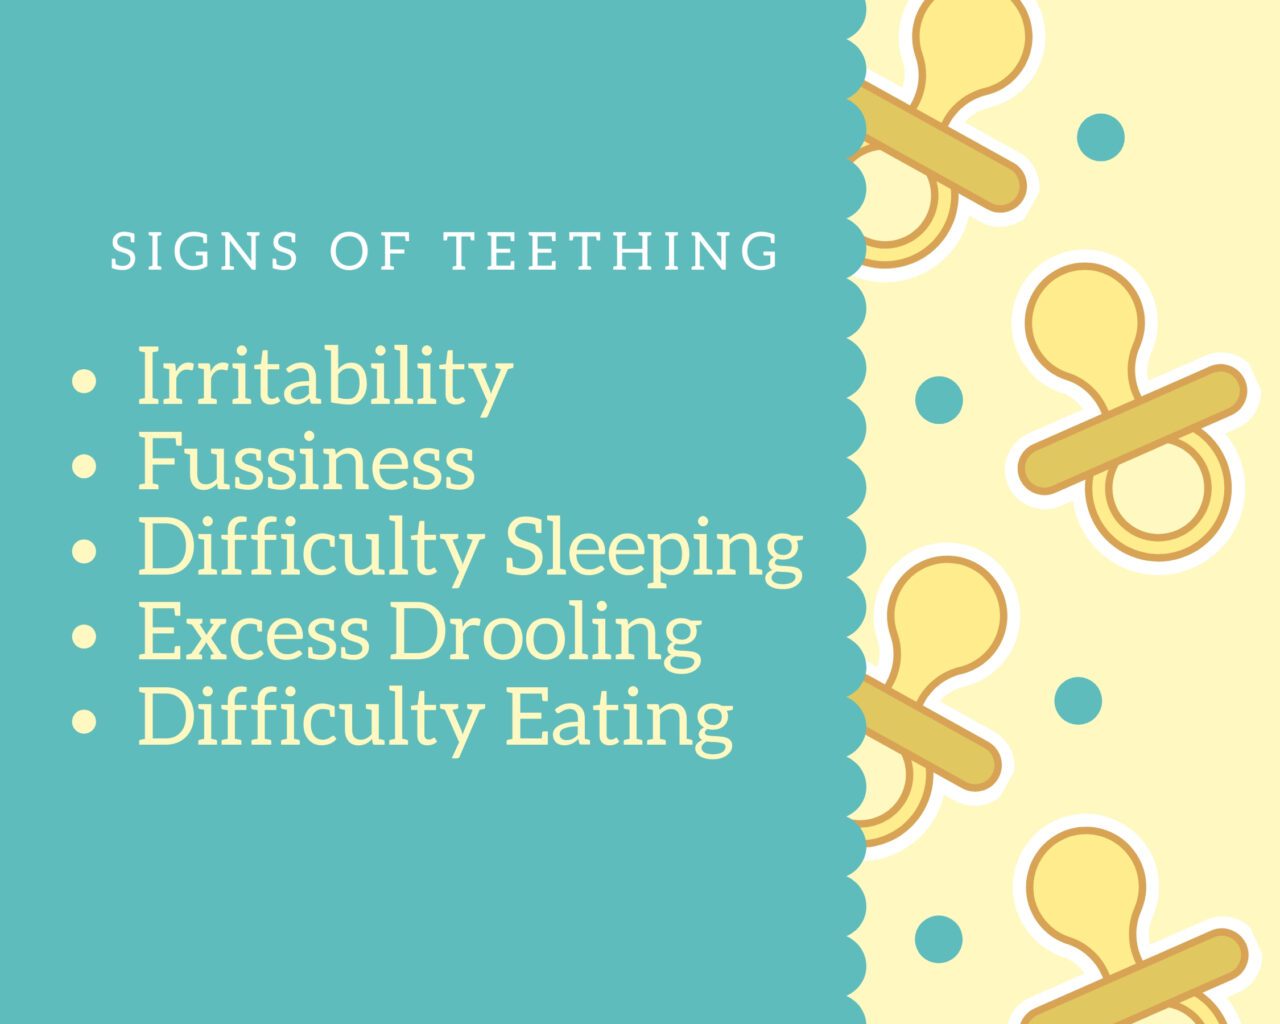 Signs of teething - irritability, fussiness, difficulty sleeping, excess drooling, difficulty eating